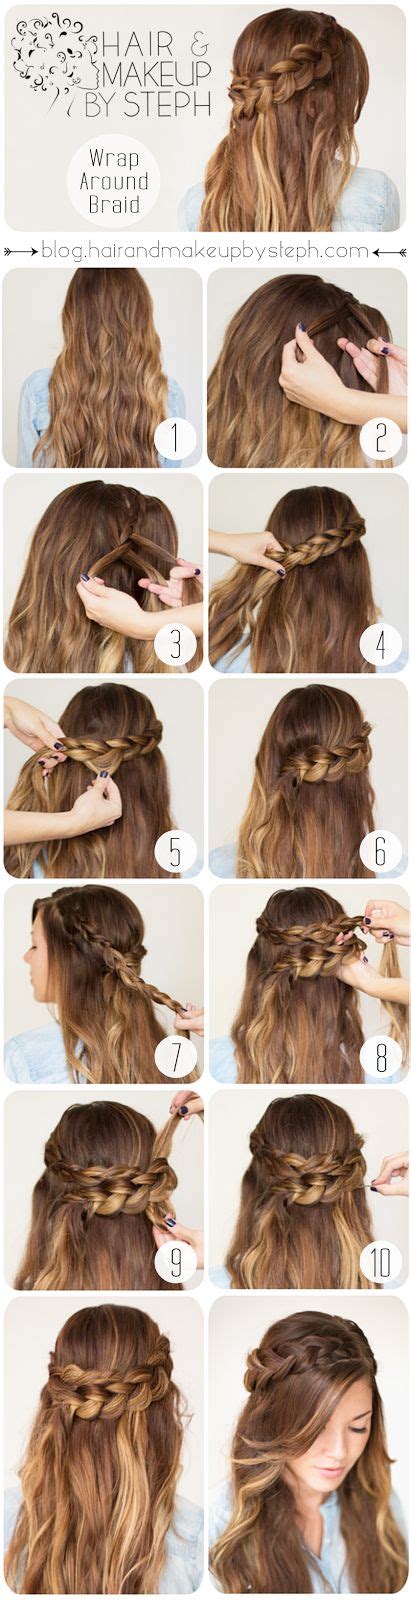 15 Super Easy Hairstyles With Tutorials Pretty Designs